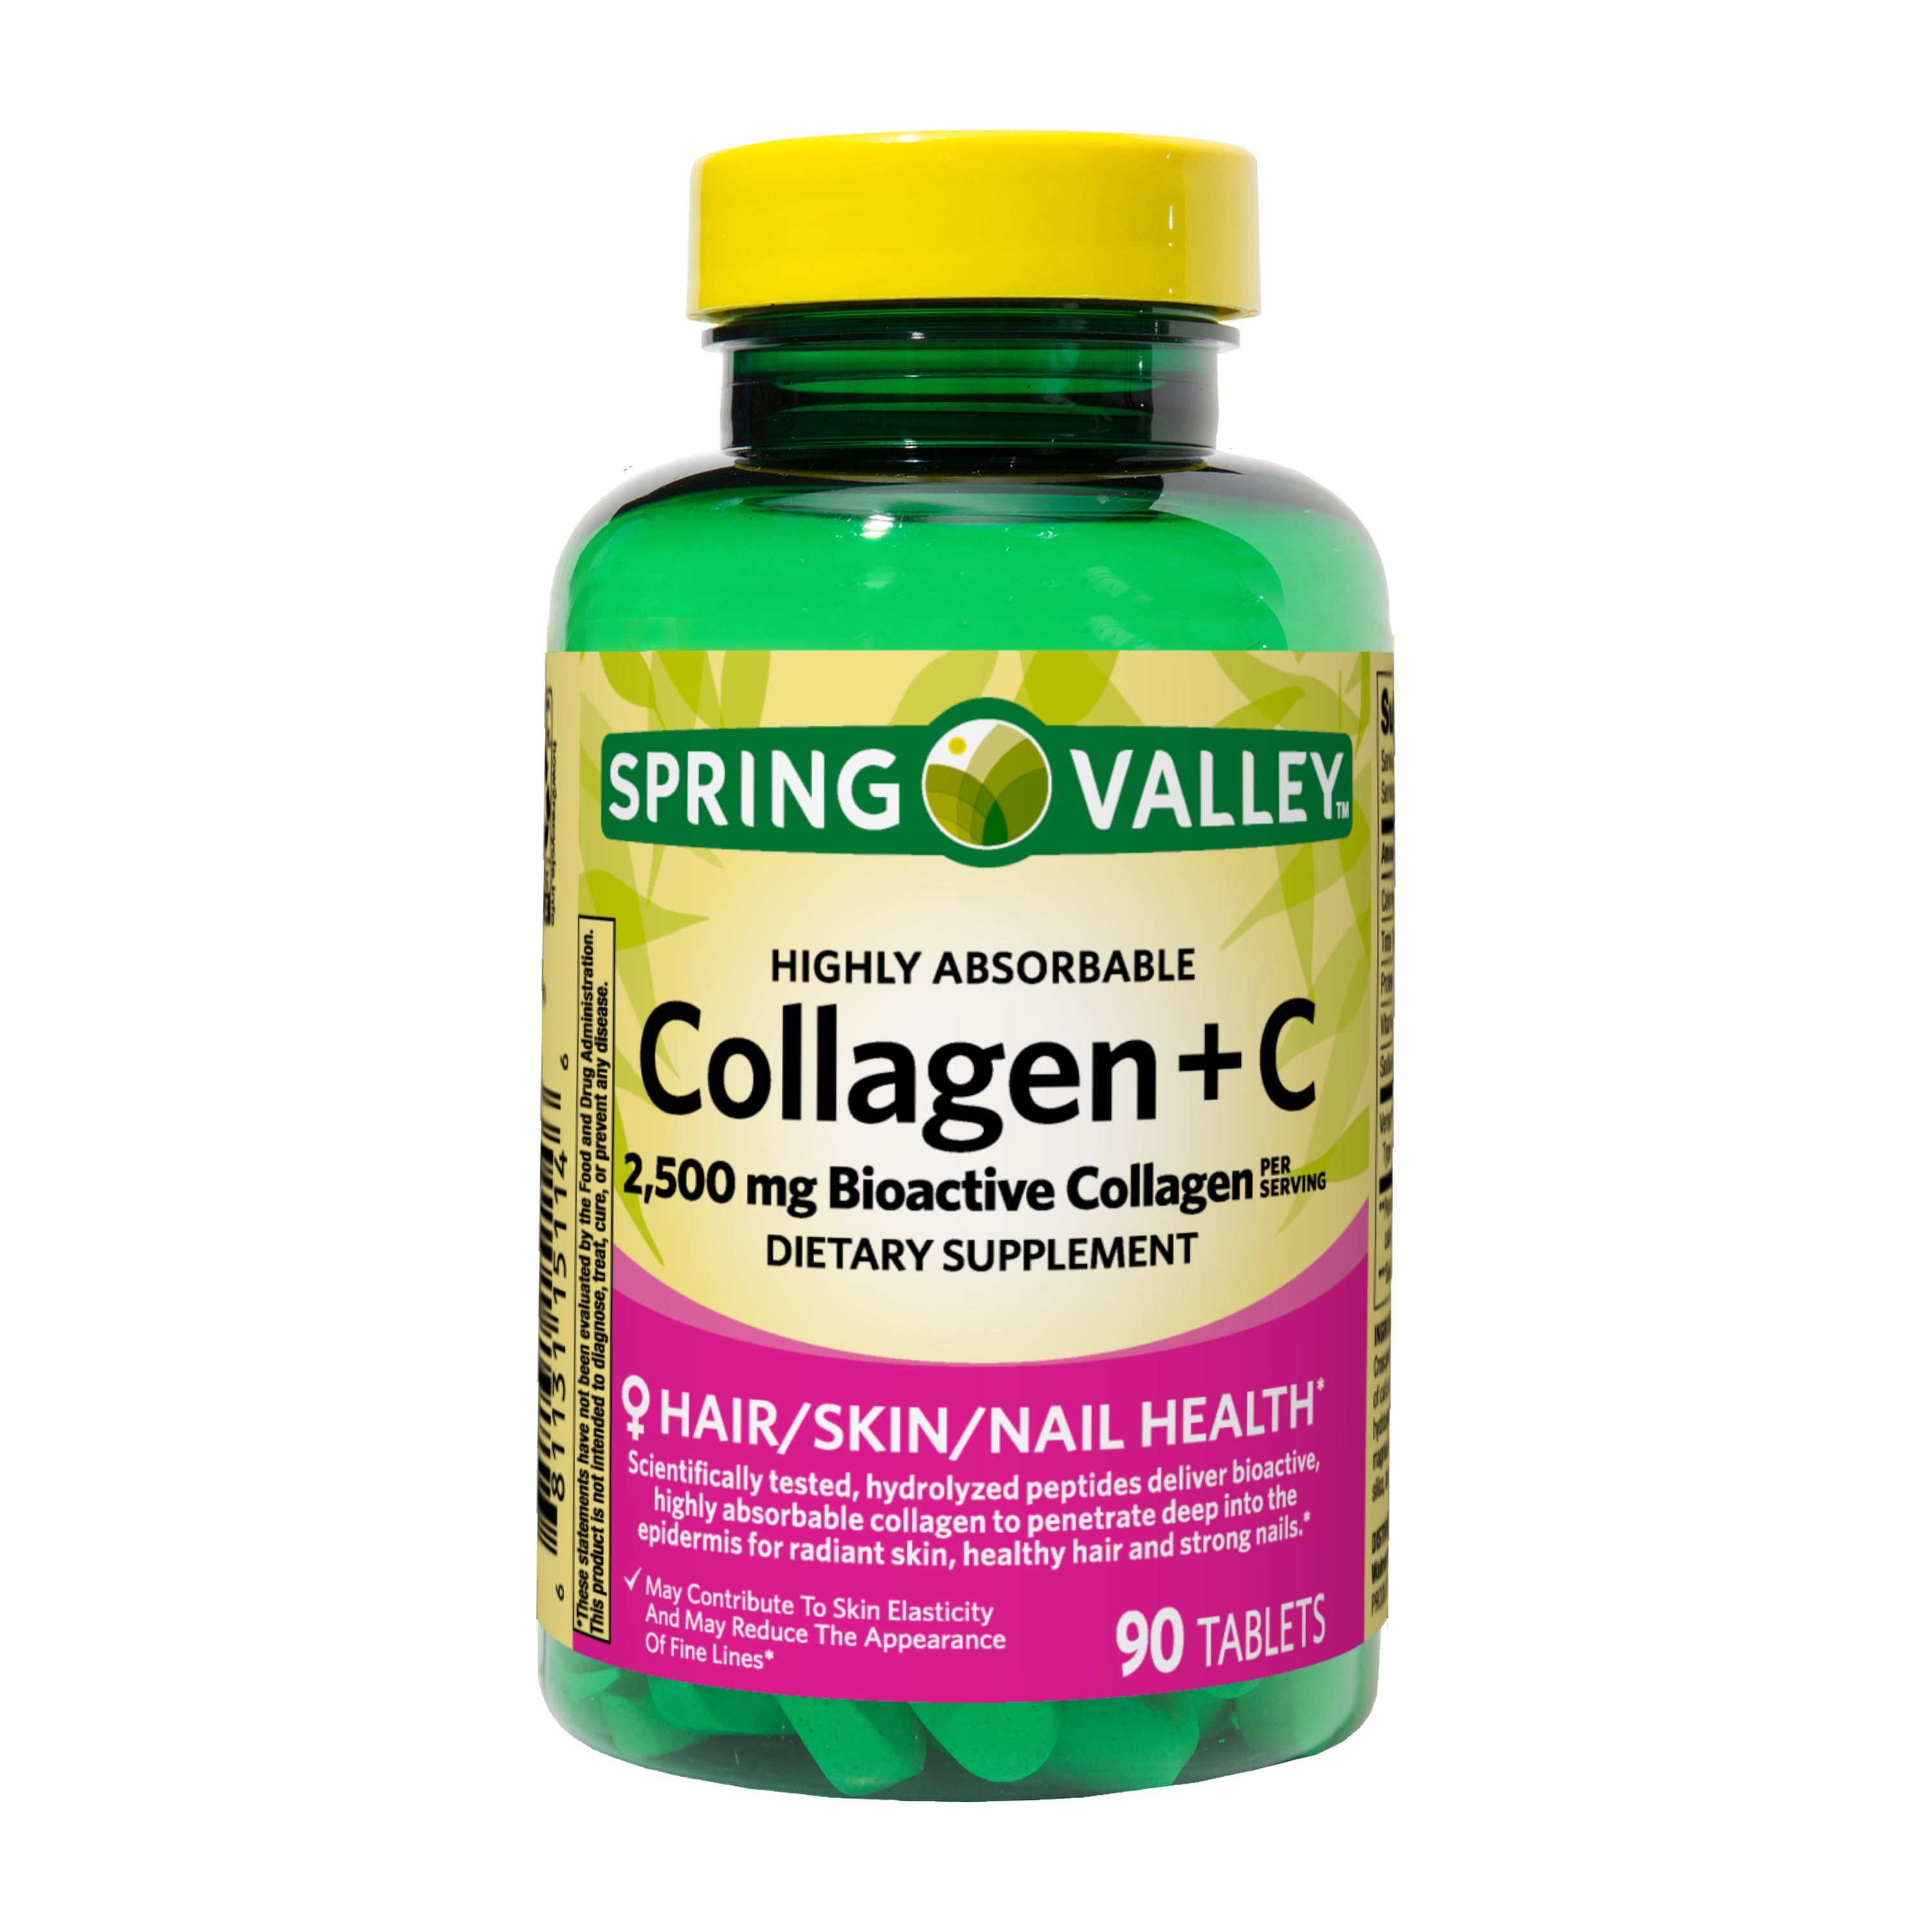 Spring Valley Highly Absorbable Collagen + C Tablets Dietary Supplement, 2,500 mg, 90 Count